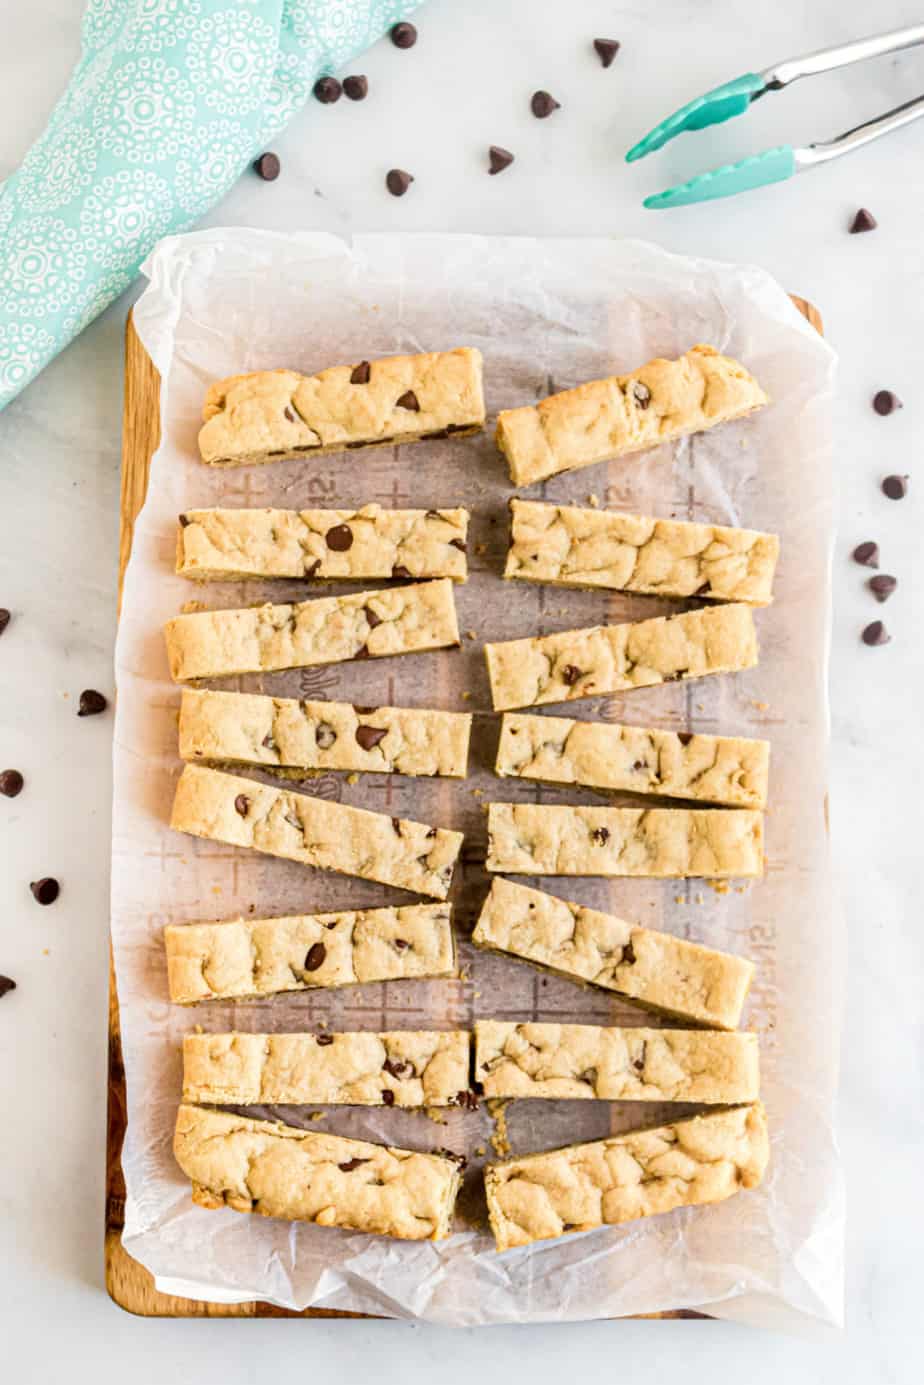 Chocolate chip cookie sticks cut into thin slices on a cutting board.